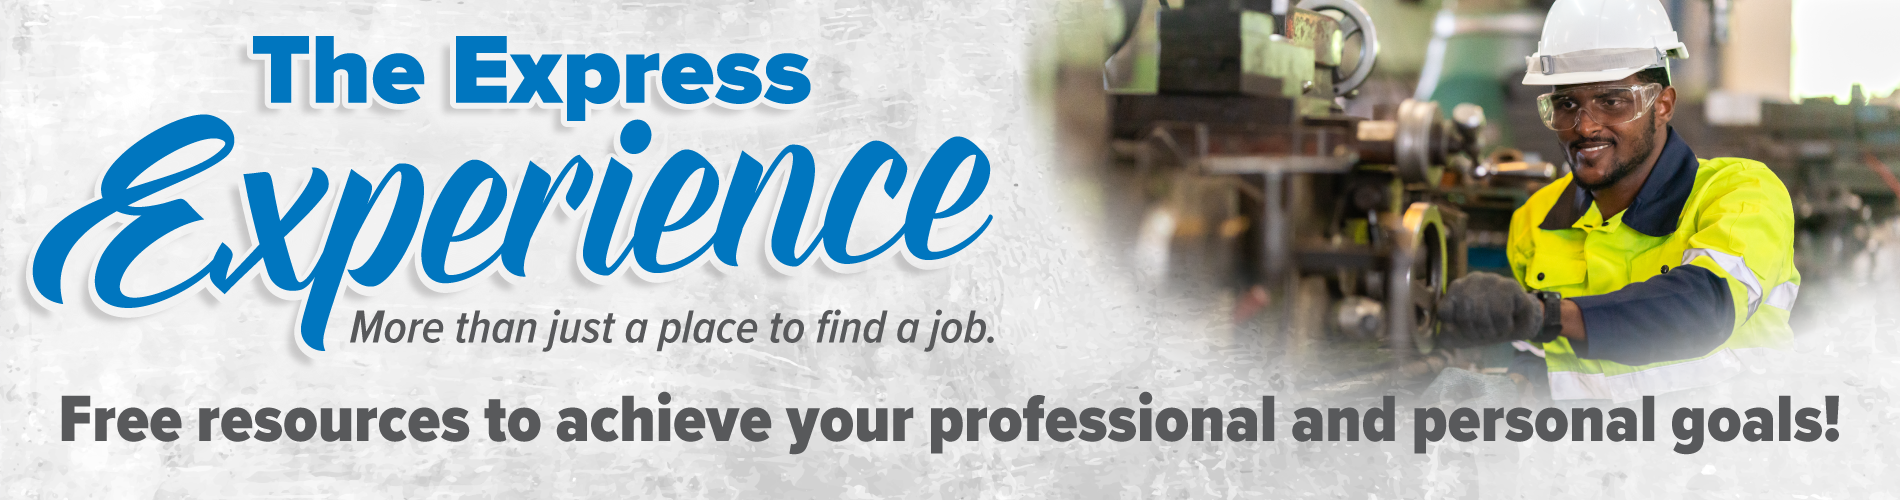 Express-Experience-Banner-Skilled-Trades